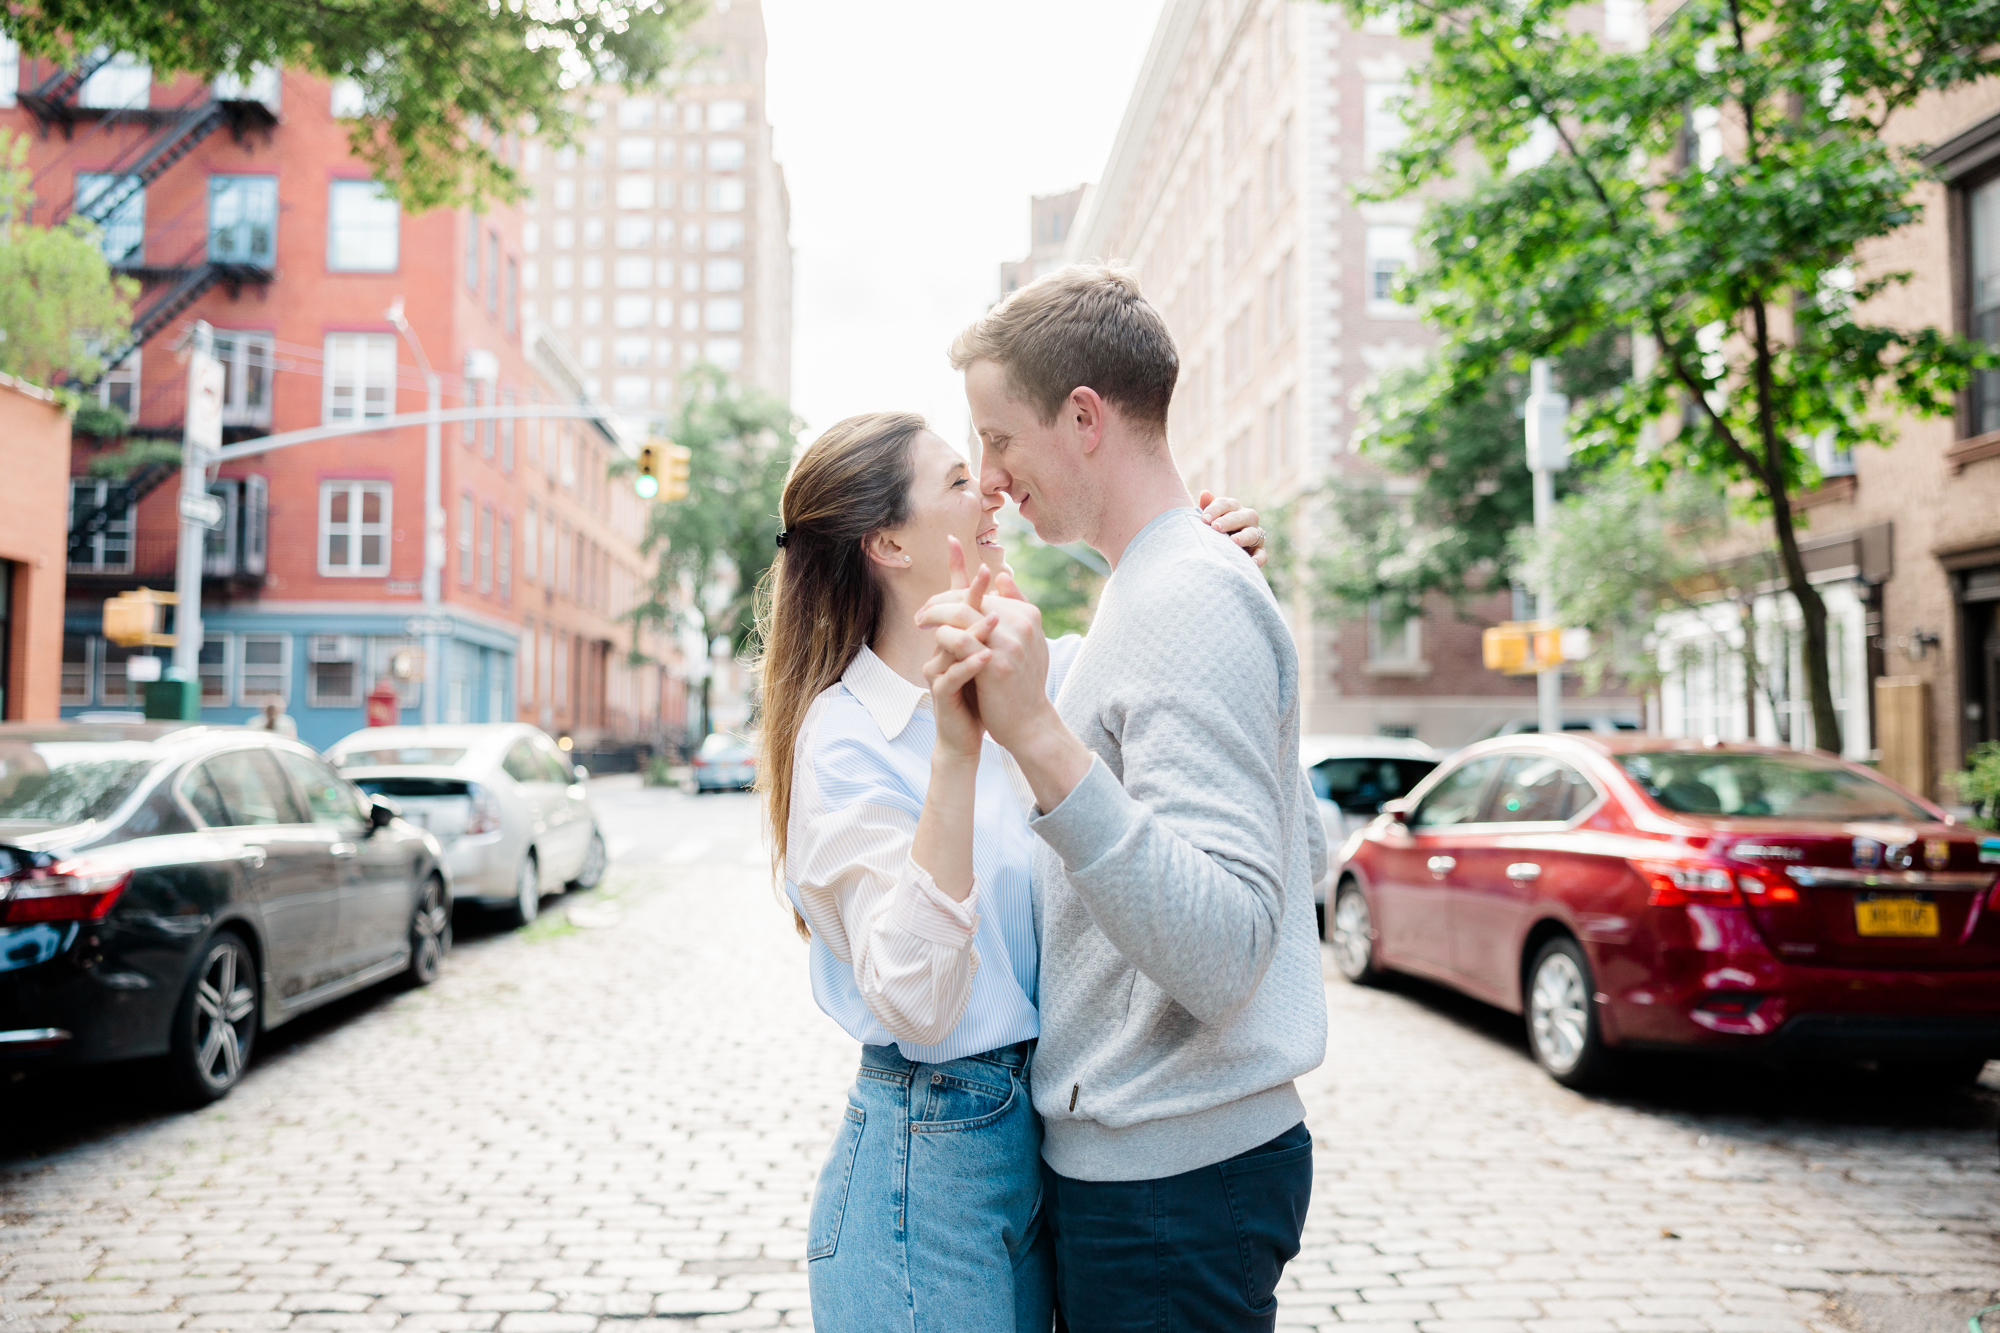 Vibrant Summer Engagement Photography in the West Village